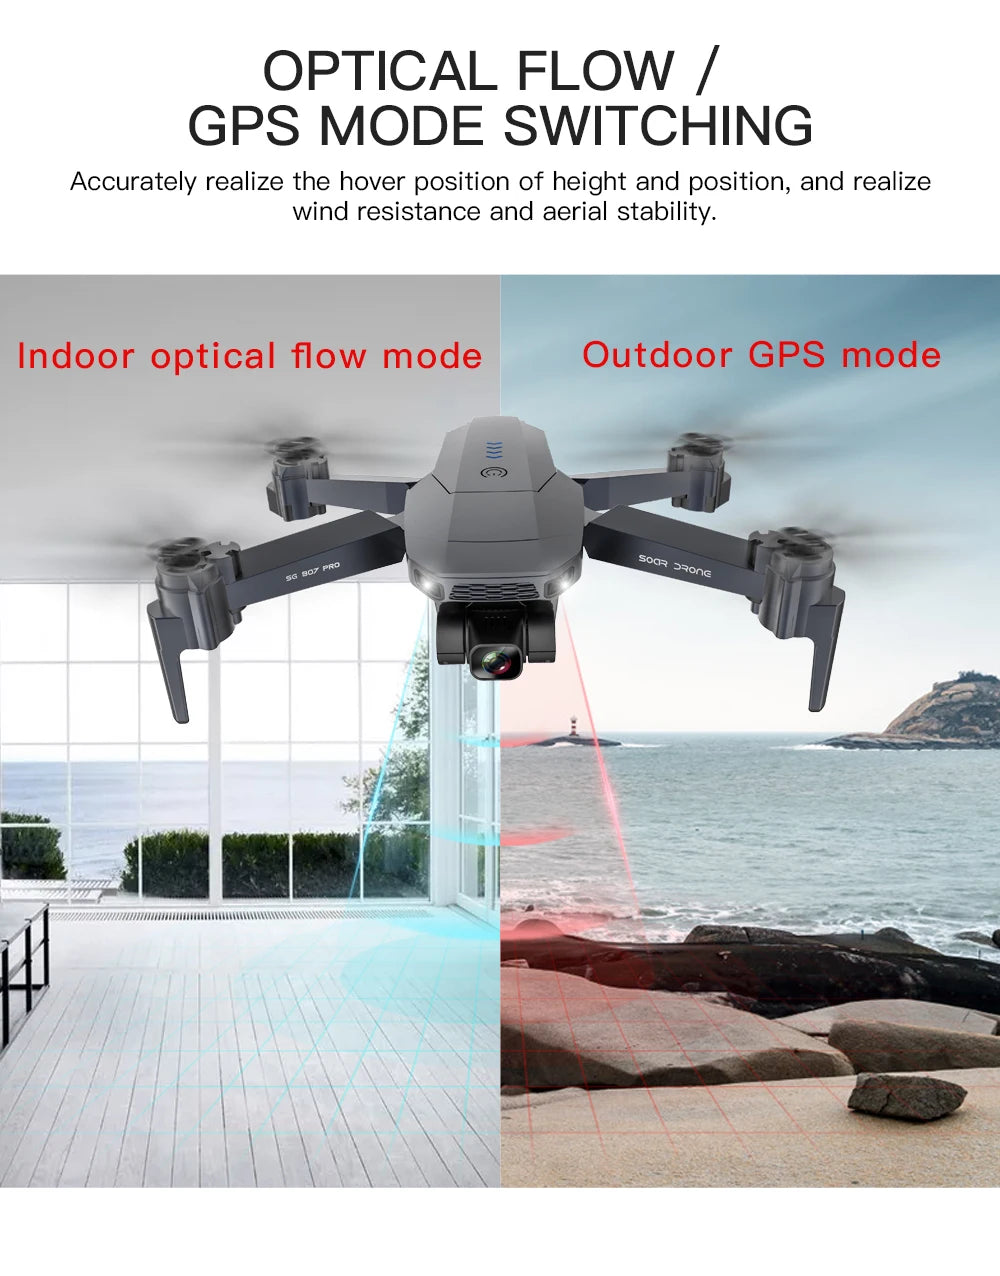 SG907 MAX Drone, OPTICAL FLOW GPS MODE SWITCHING Accurately realize the hover